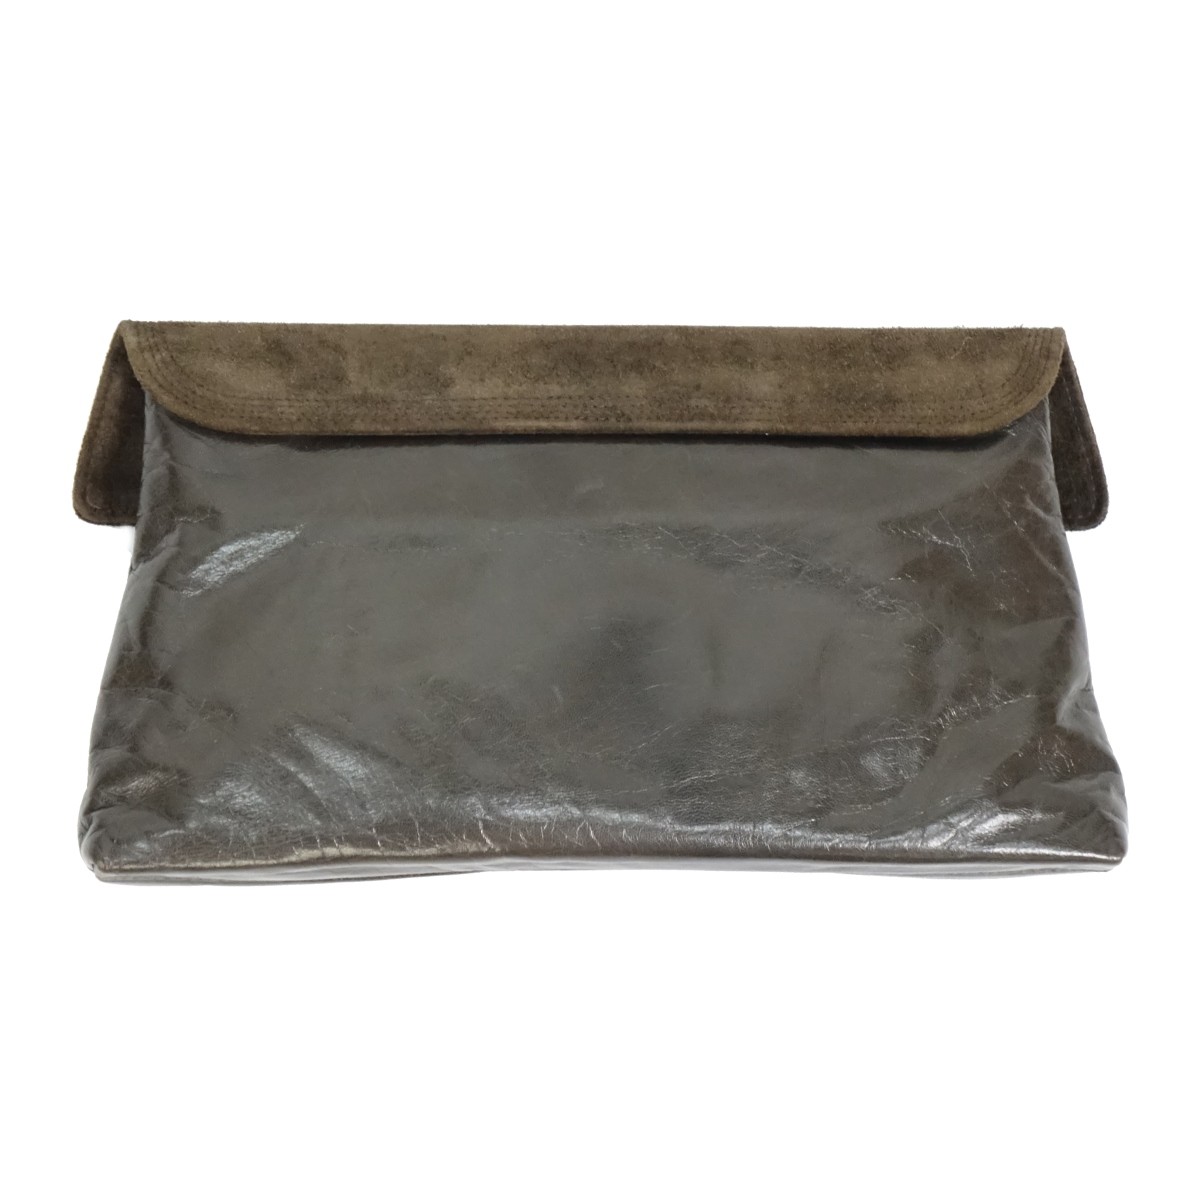 Vittorio Ricci Leather and Suede Clutch